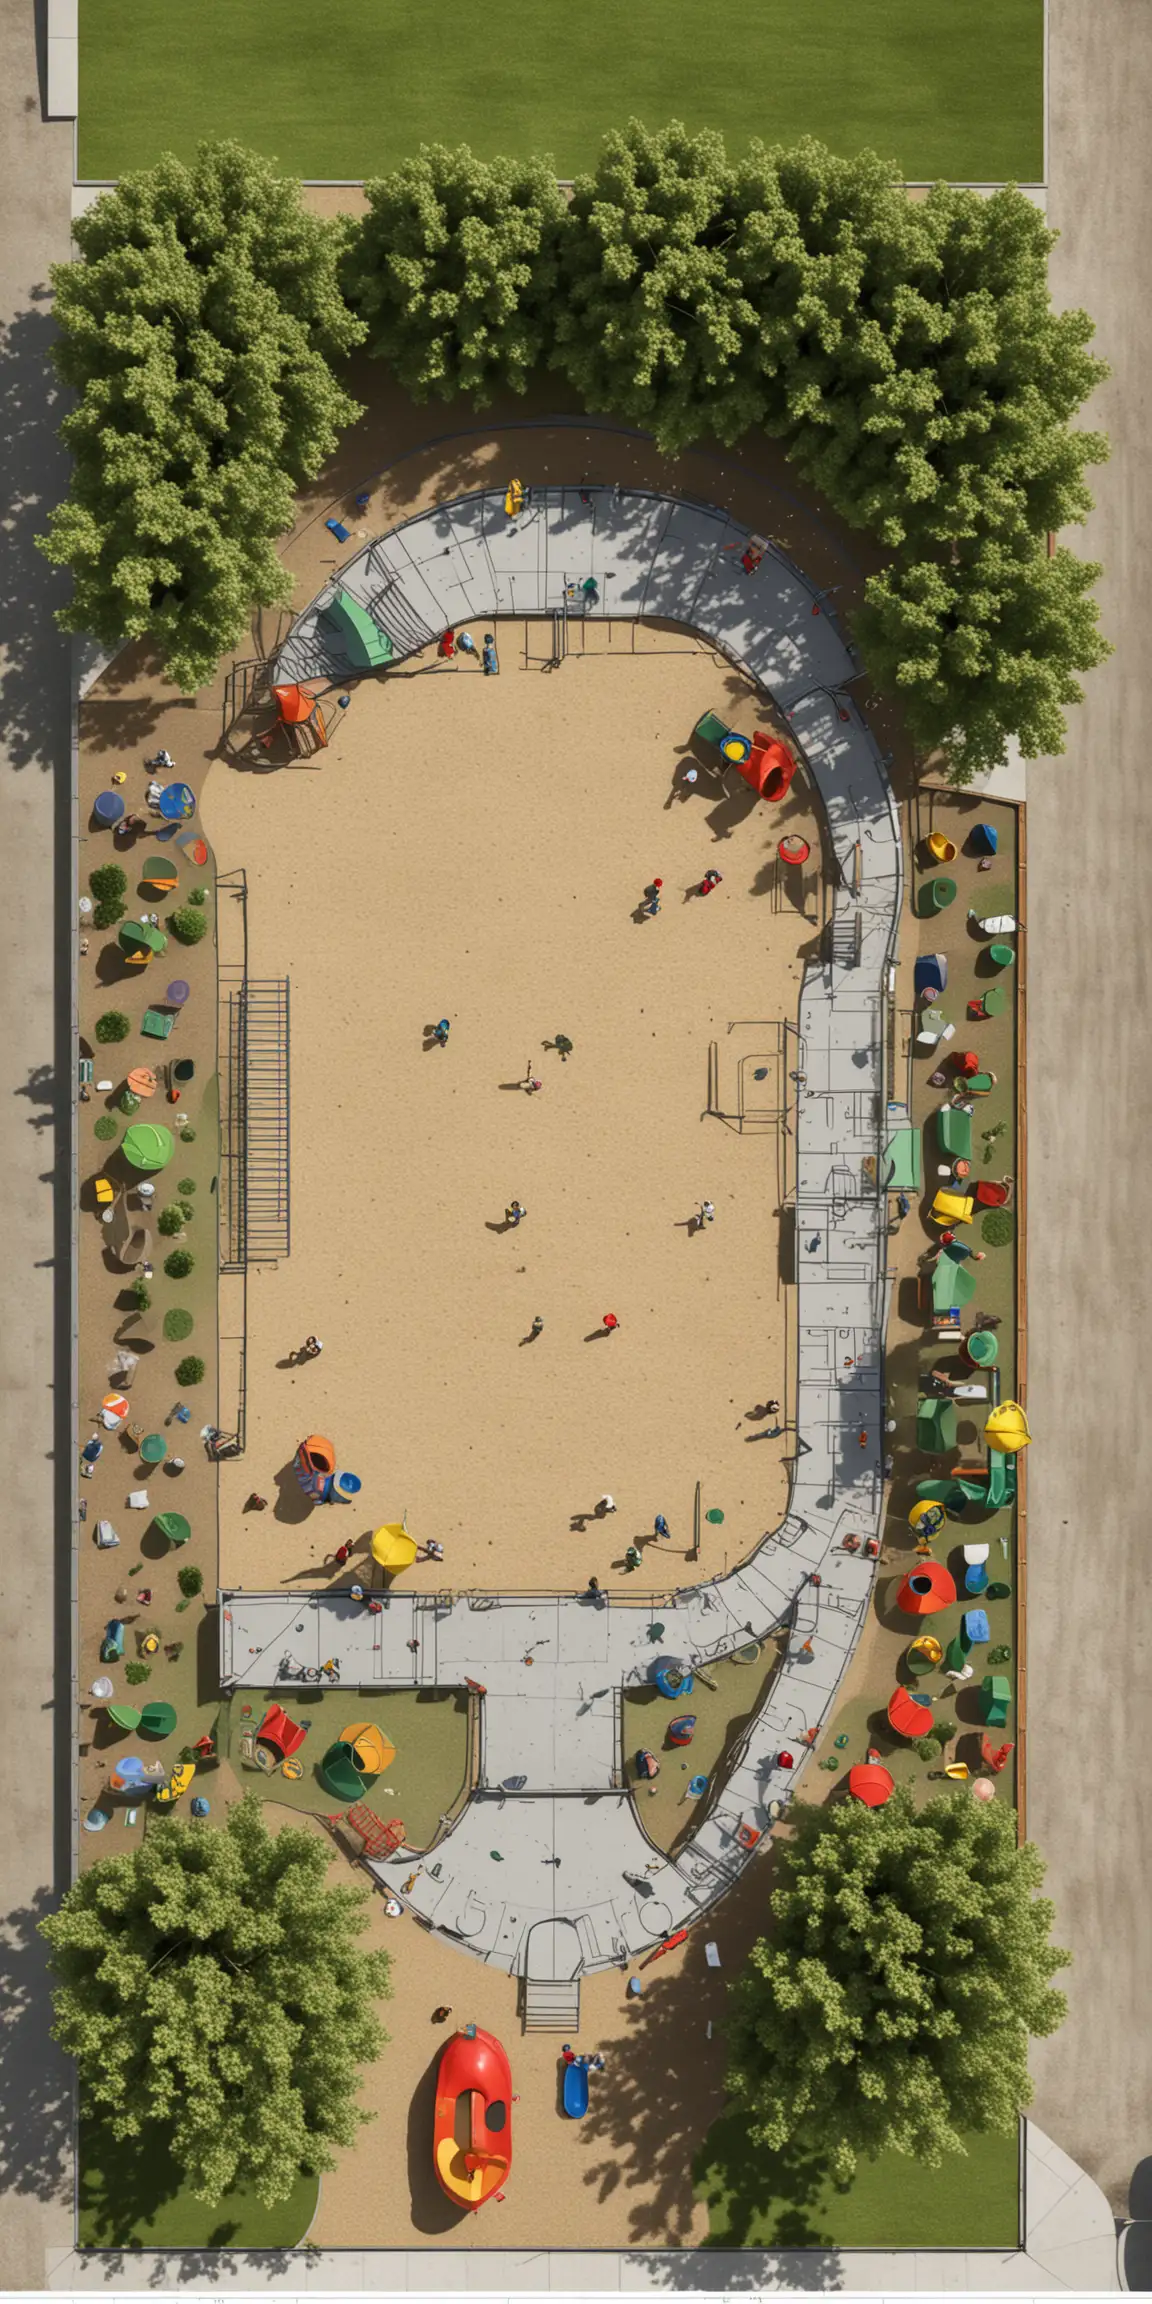 Architectural Drawing of Playground Design in Plan View